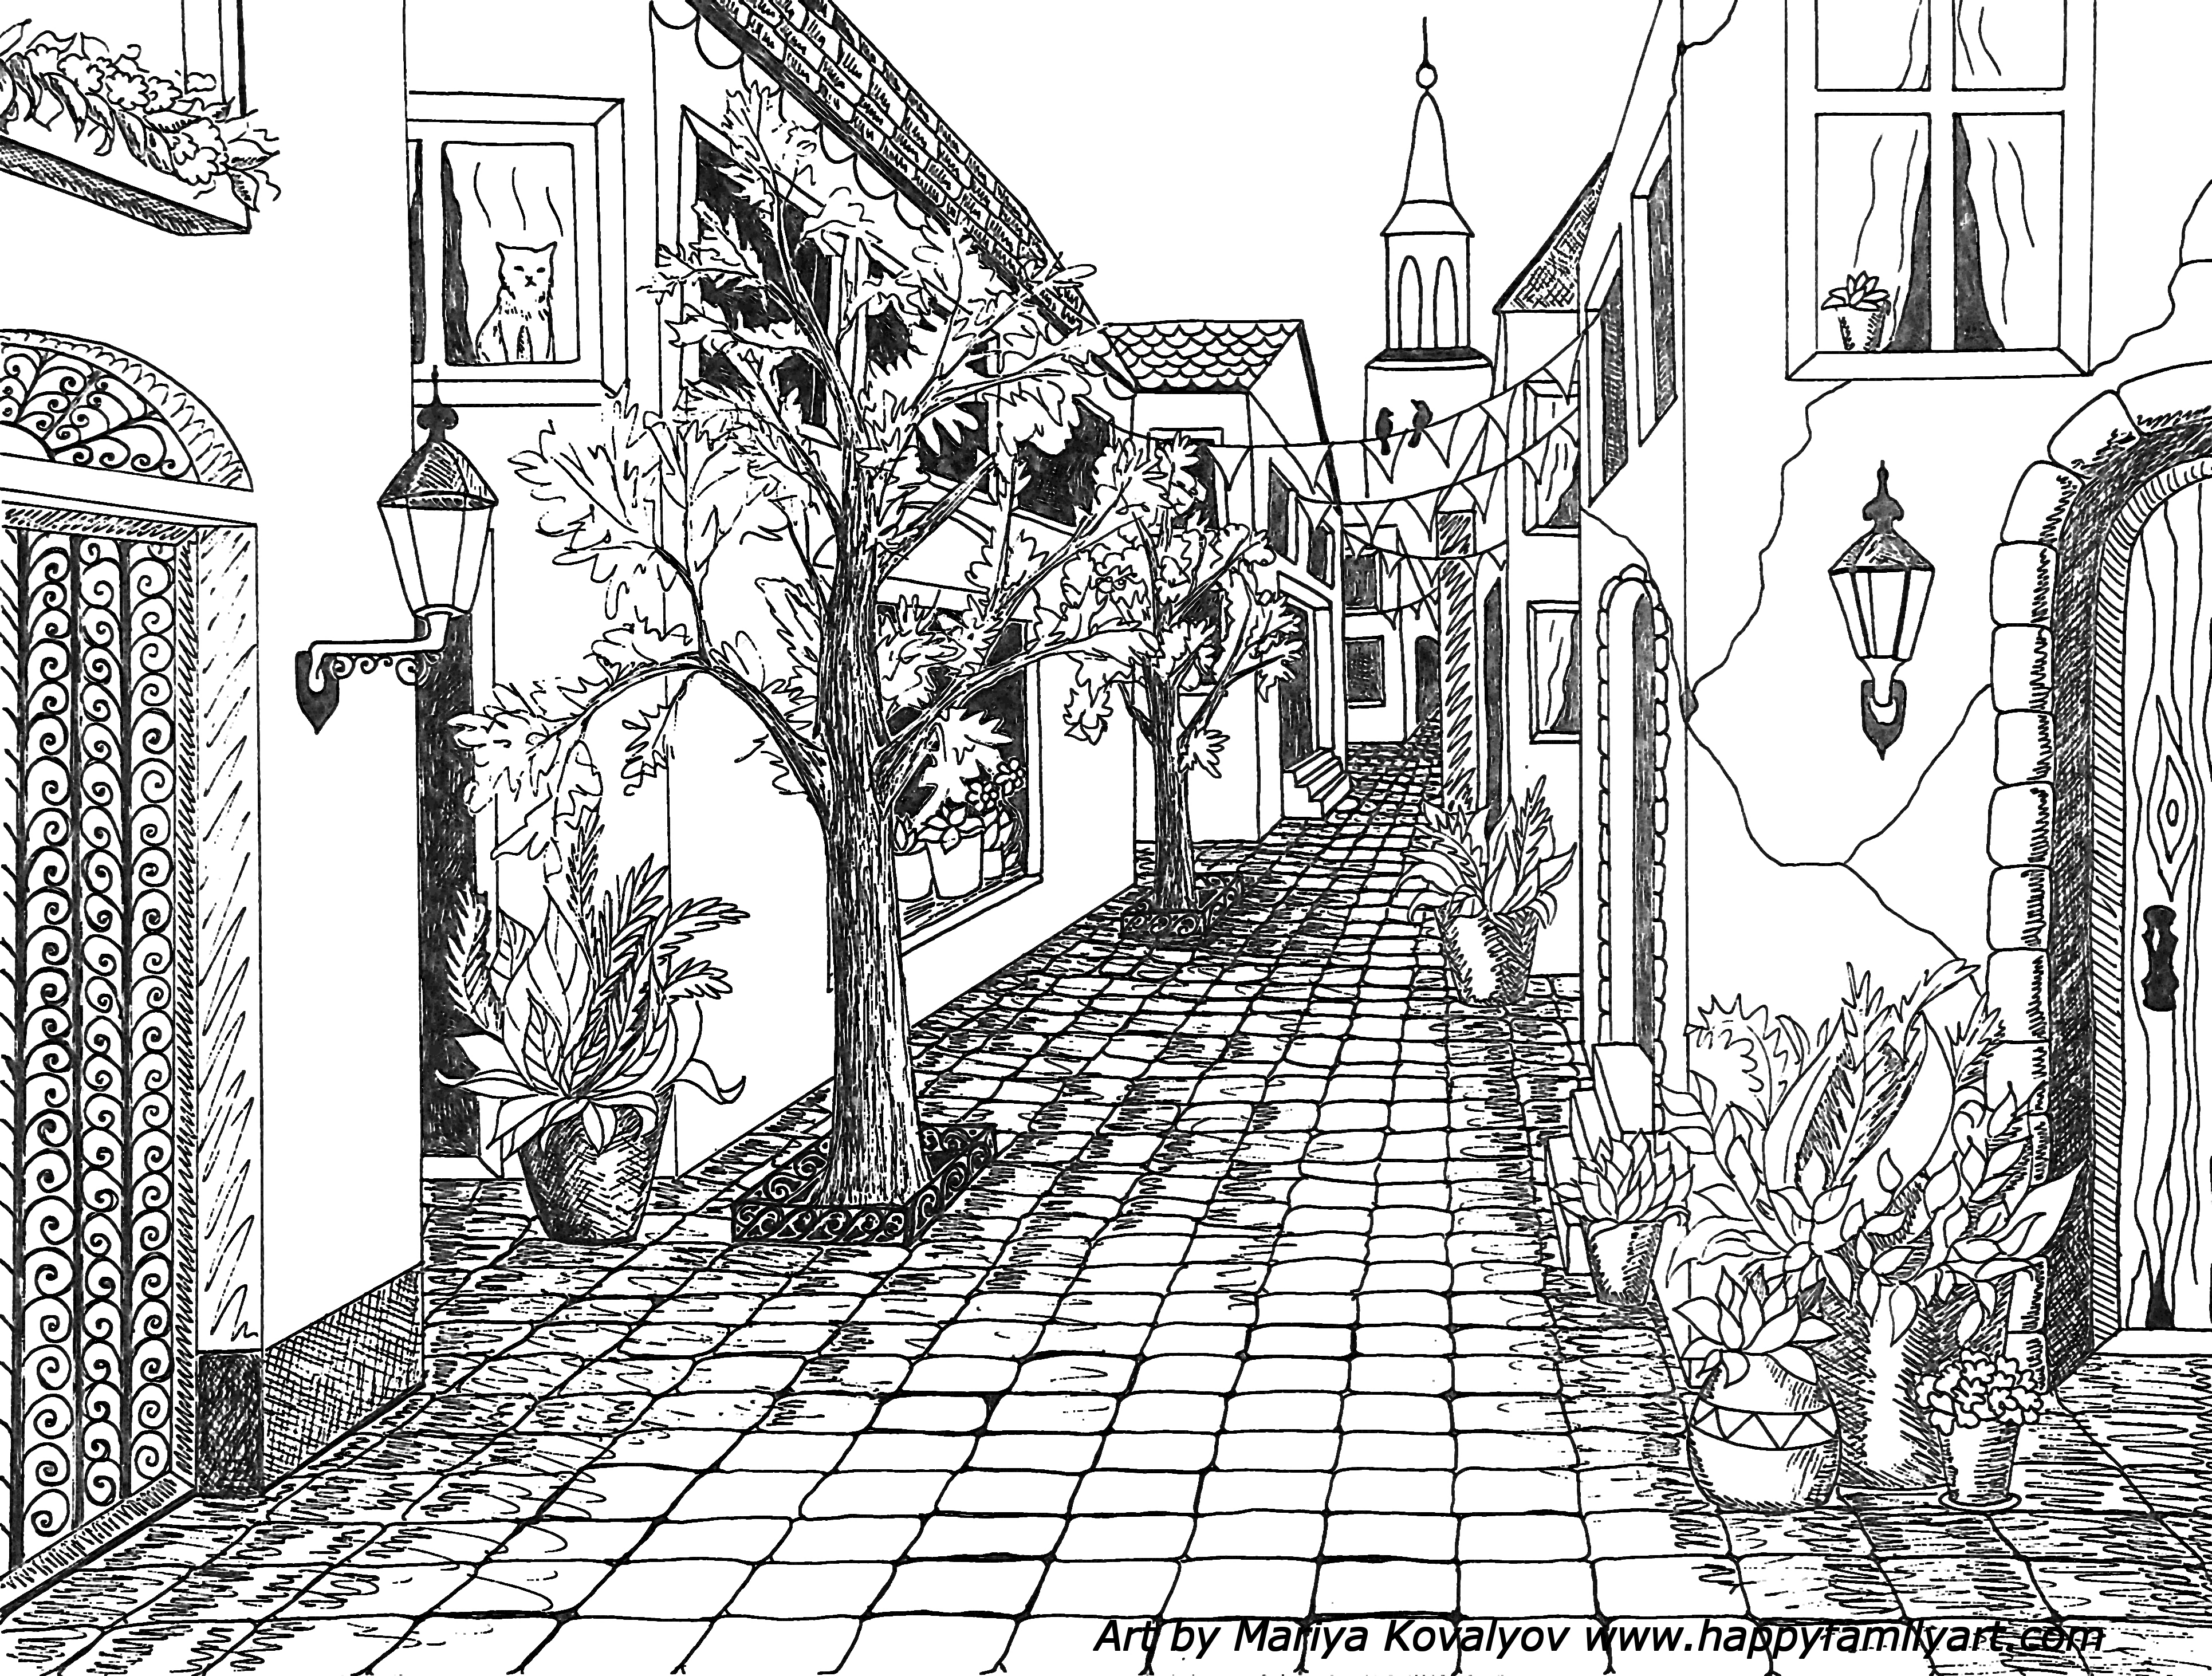 Single Point Perspective Drawing of a Street Happy